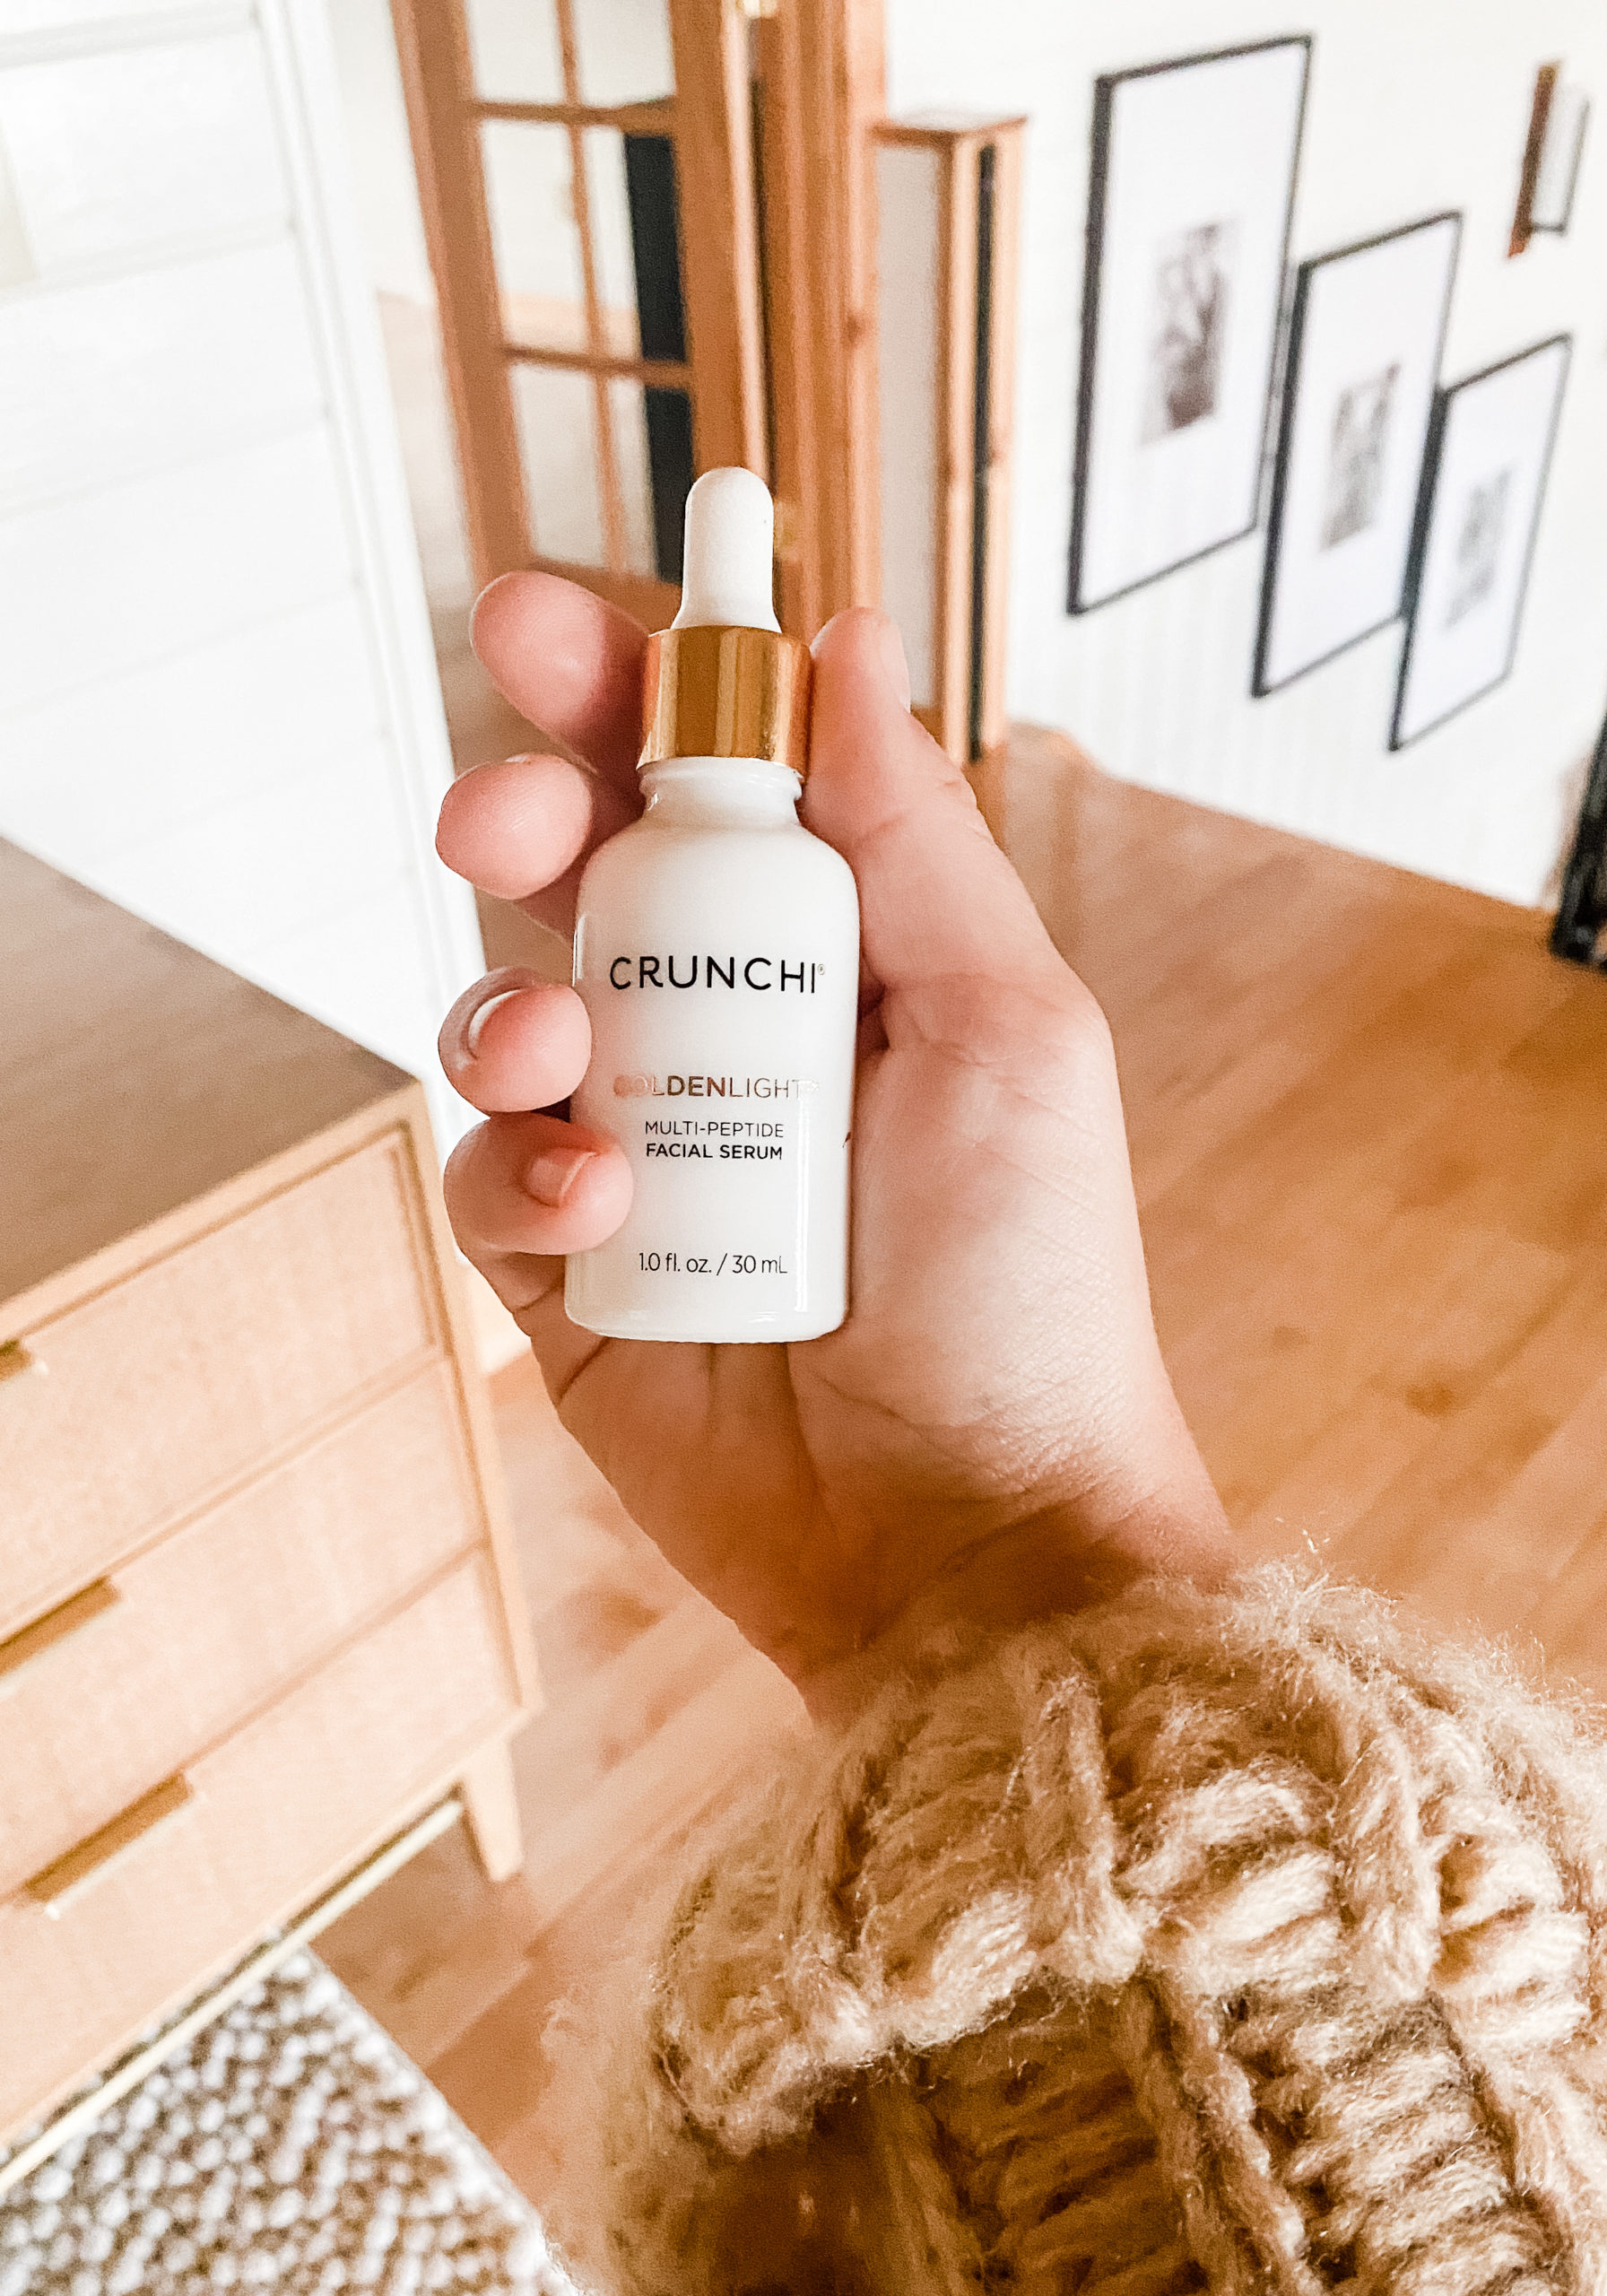 This image shows a hand holding Crunchi's Goldenlight serum, a skincare product that cna help transform your skin.